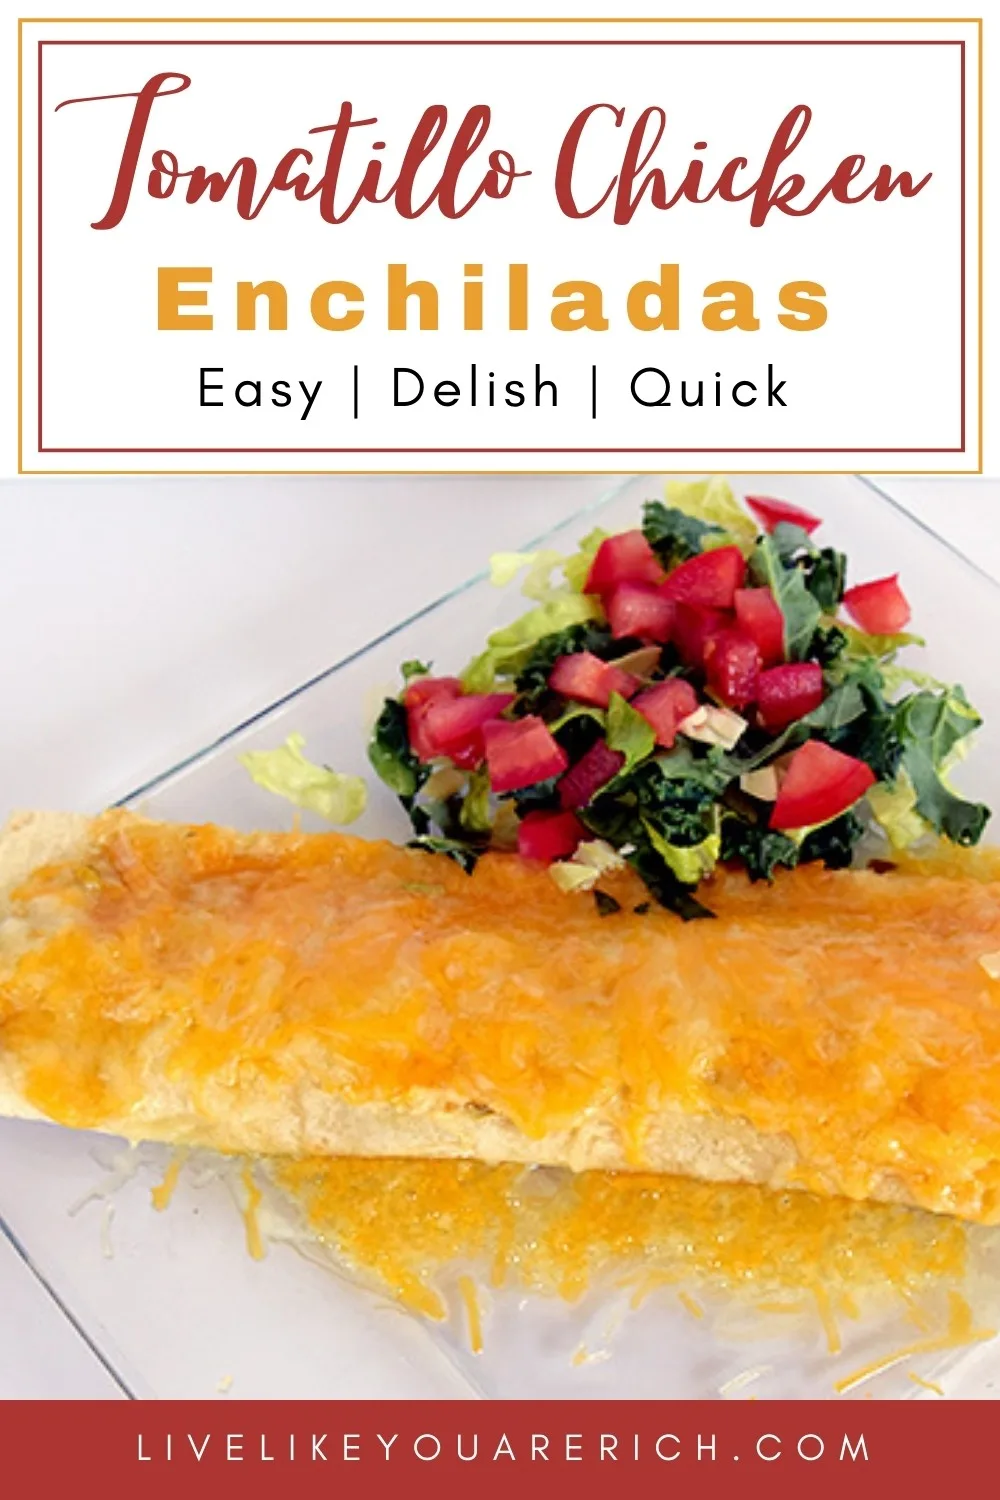 This tomatillo chicken enchilada recipe is an amazing recipe that can be prepped in about 7 minutes or less. You can make it all from cans or use as many fresh ingredients as you desire. #enchiladas #tomatillochicken